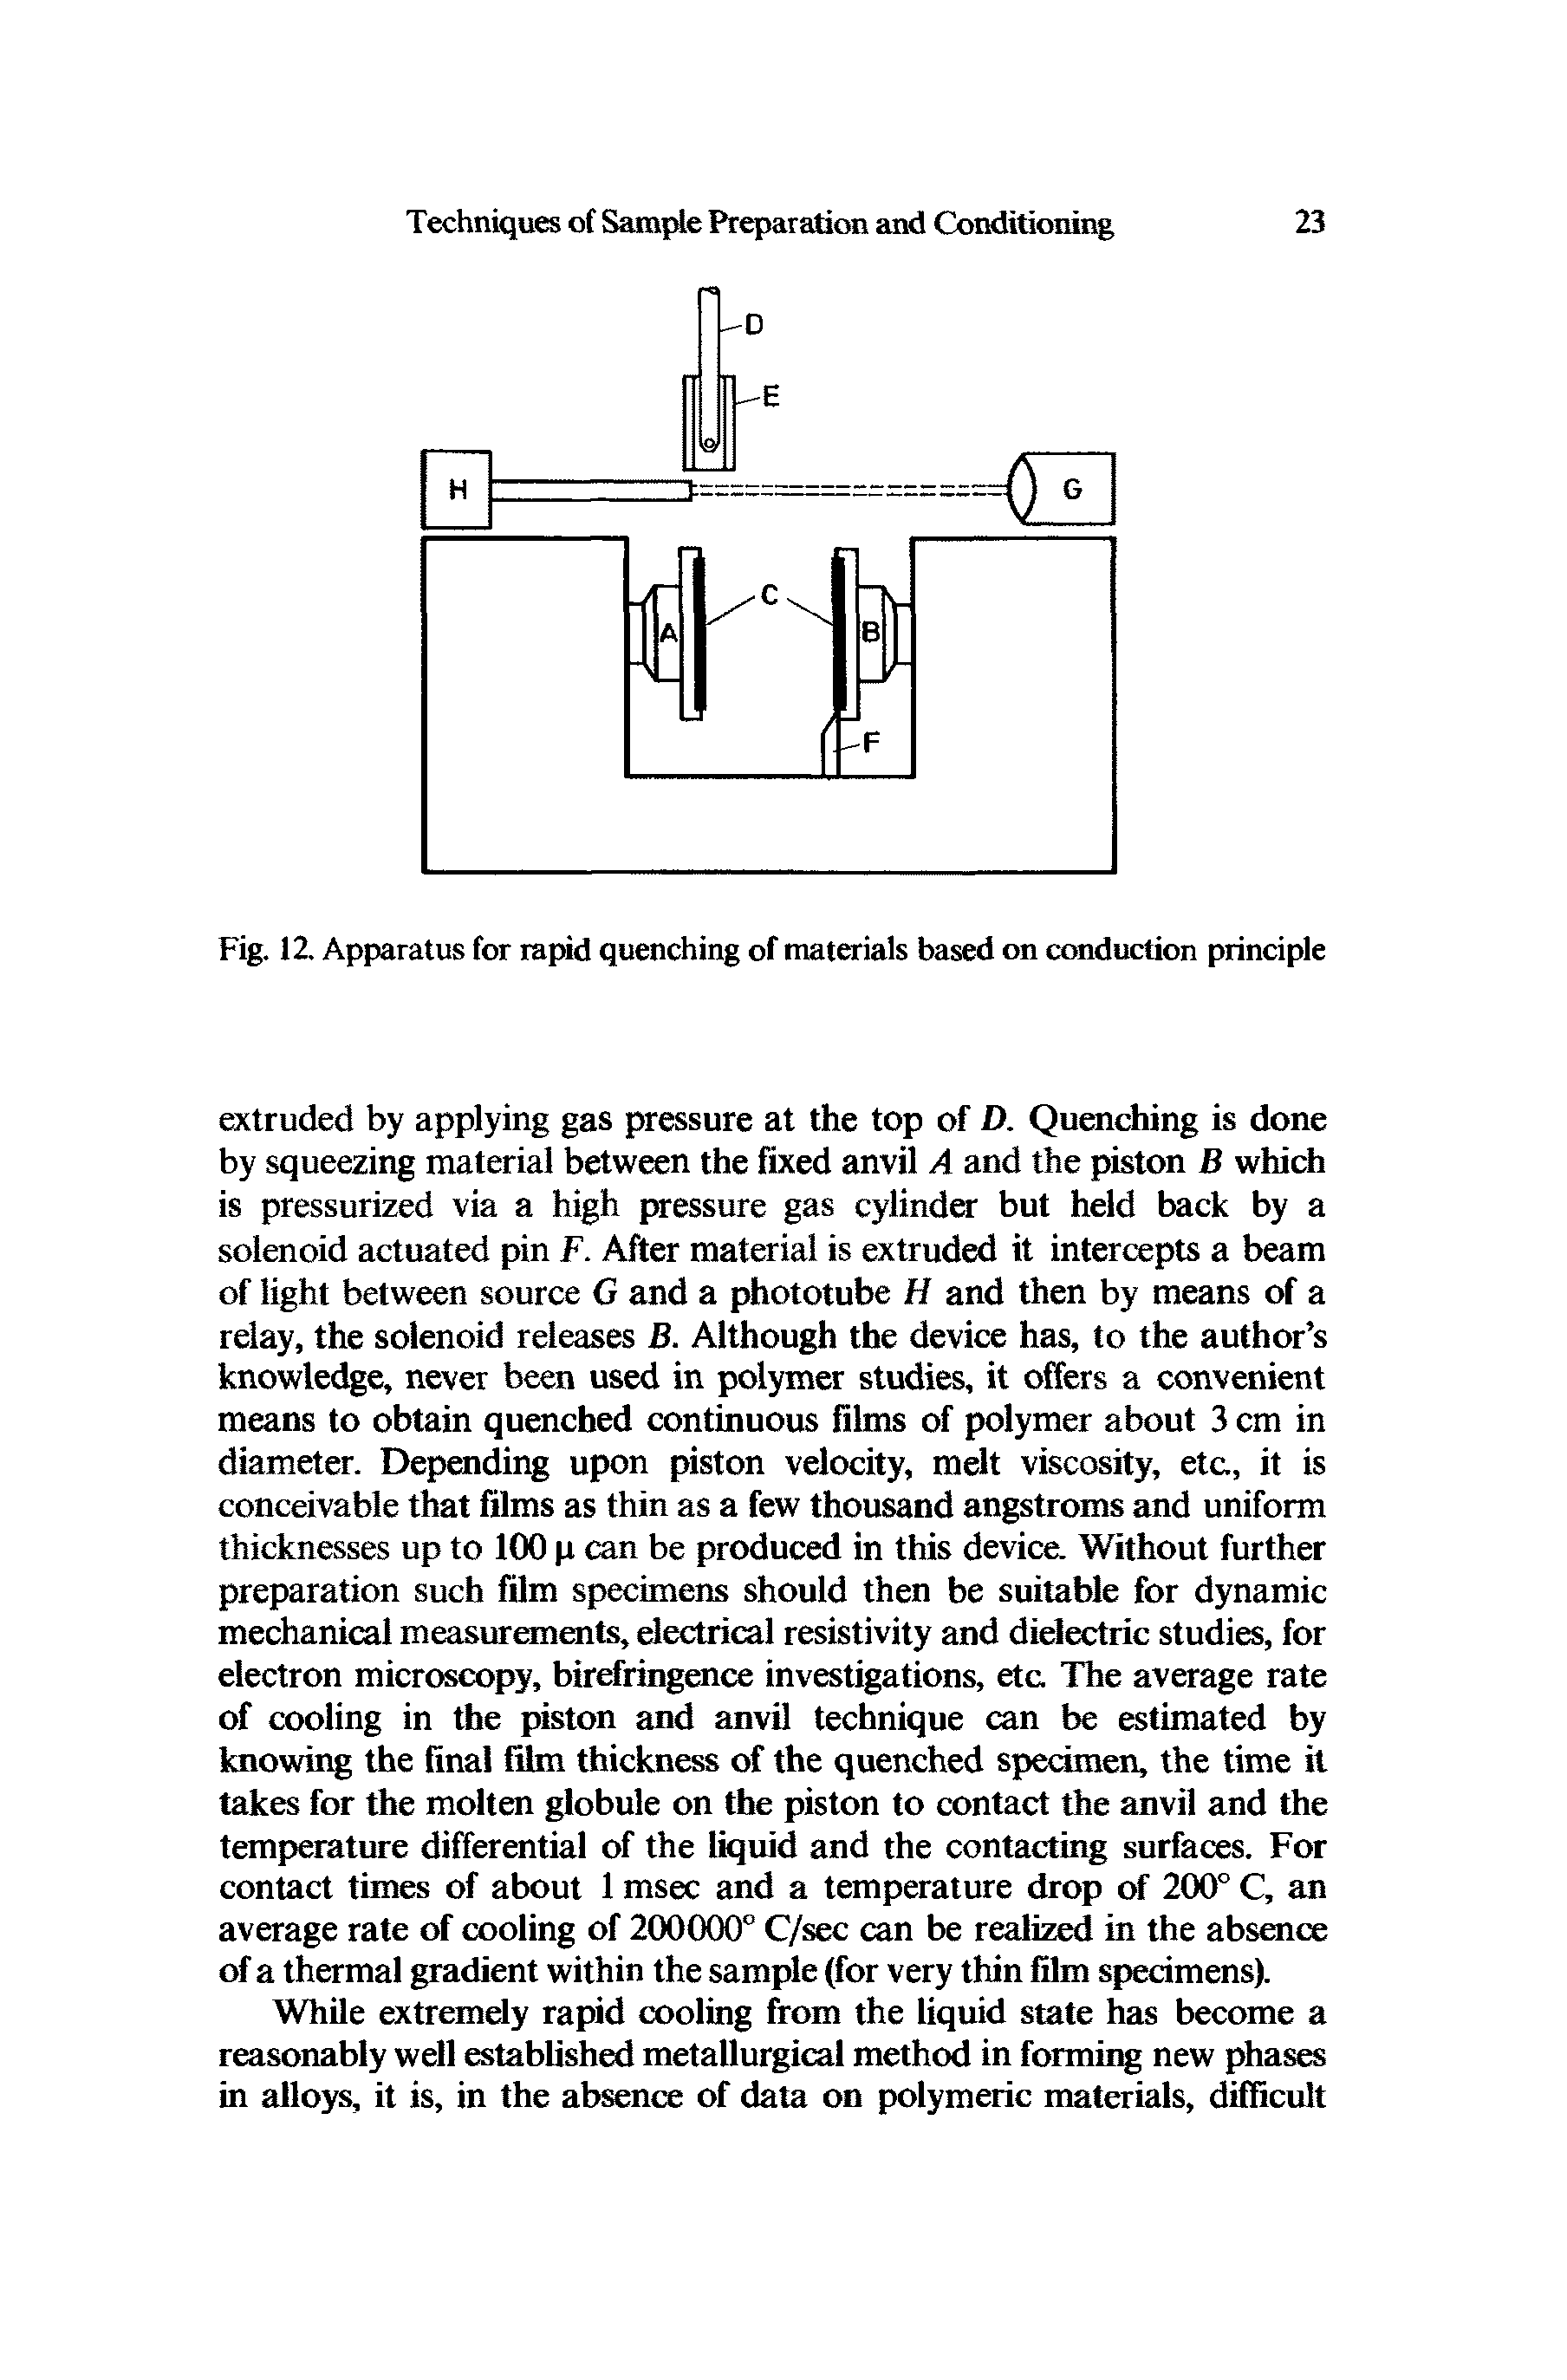 Fig. 12. Apparatus for rapid quenching of materials based on conduction principle...